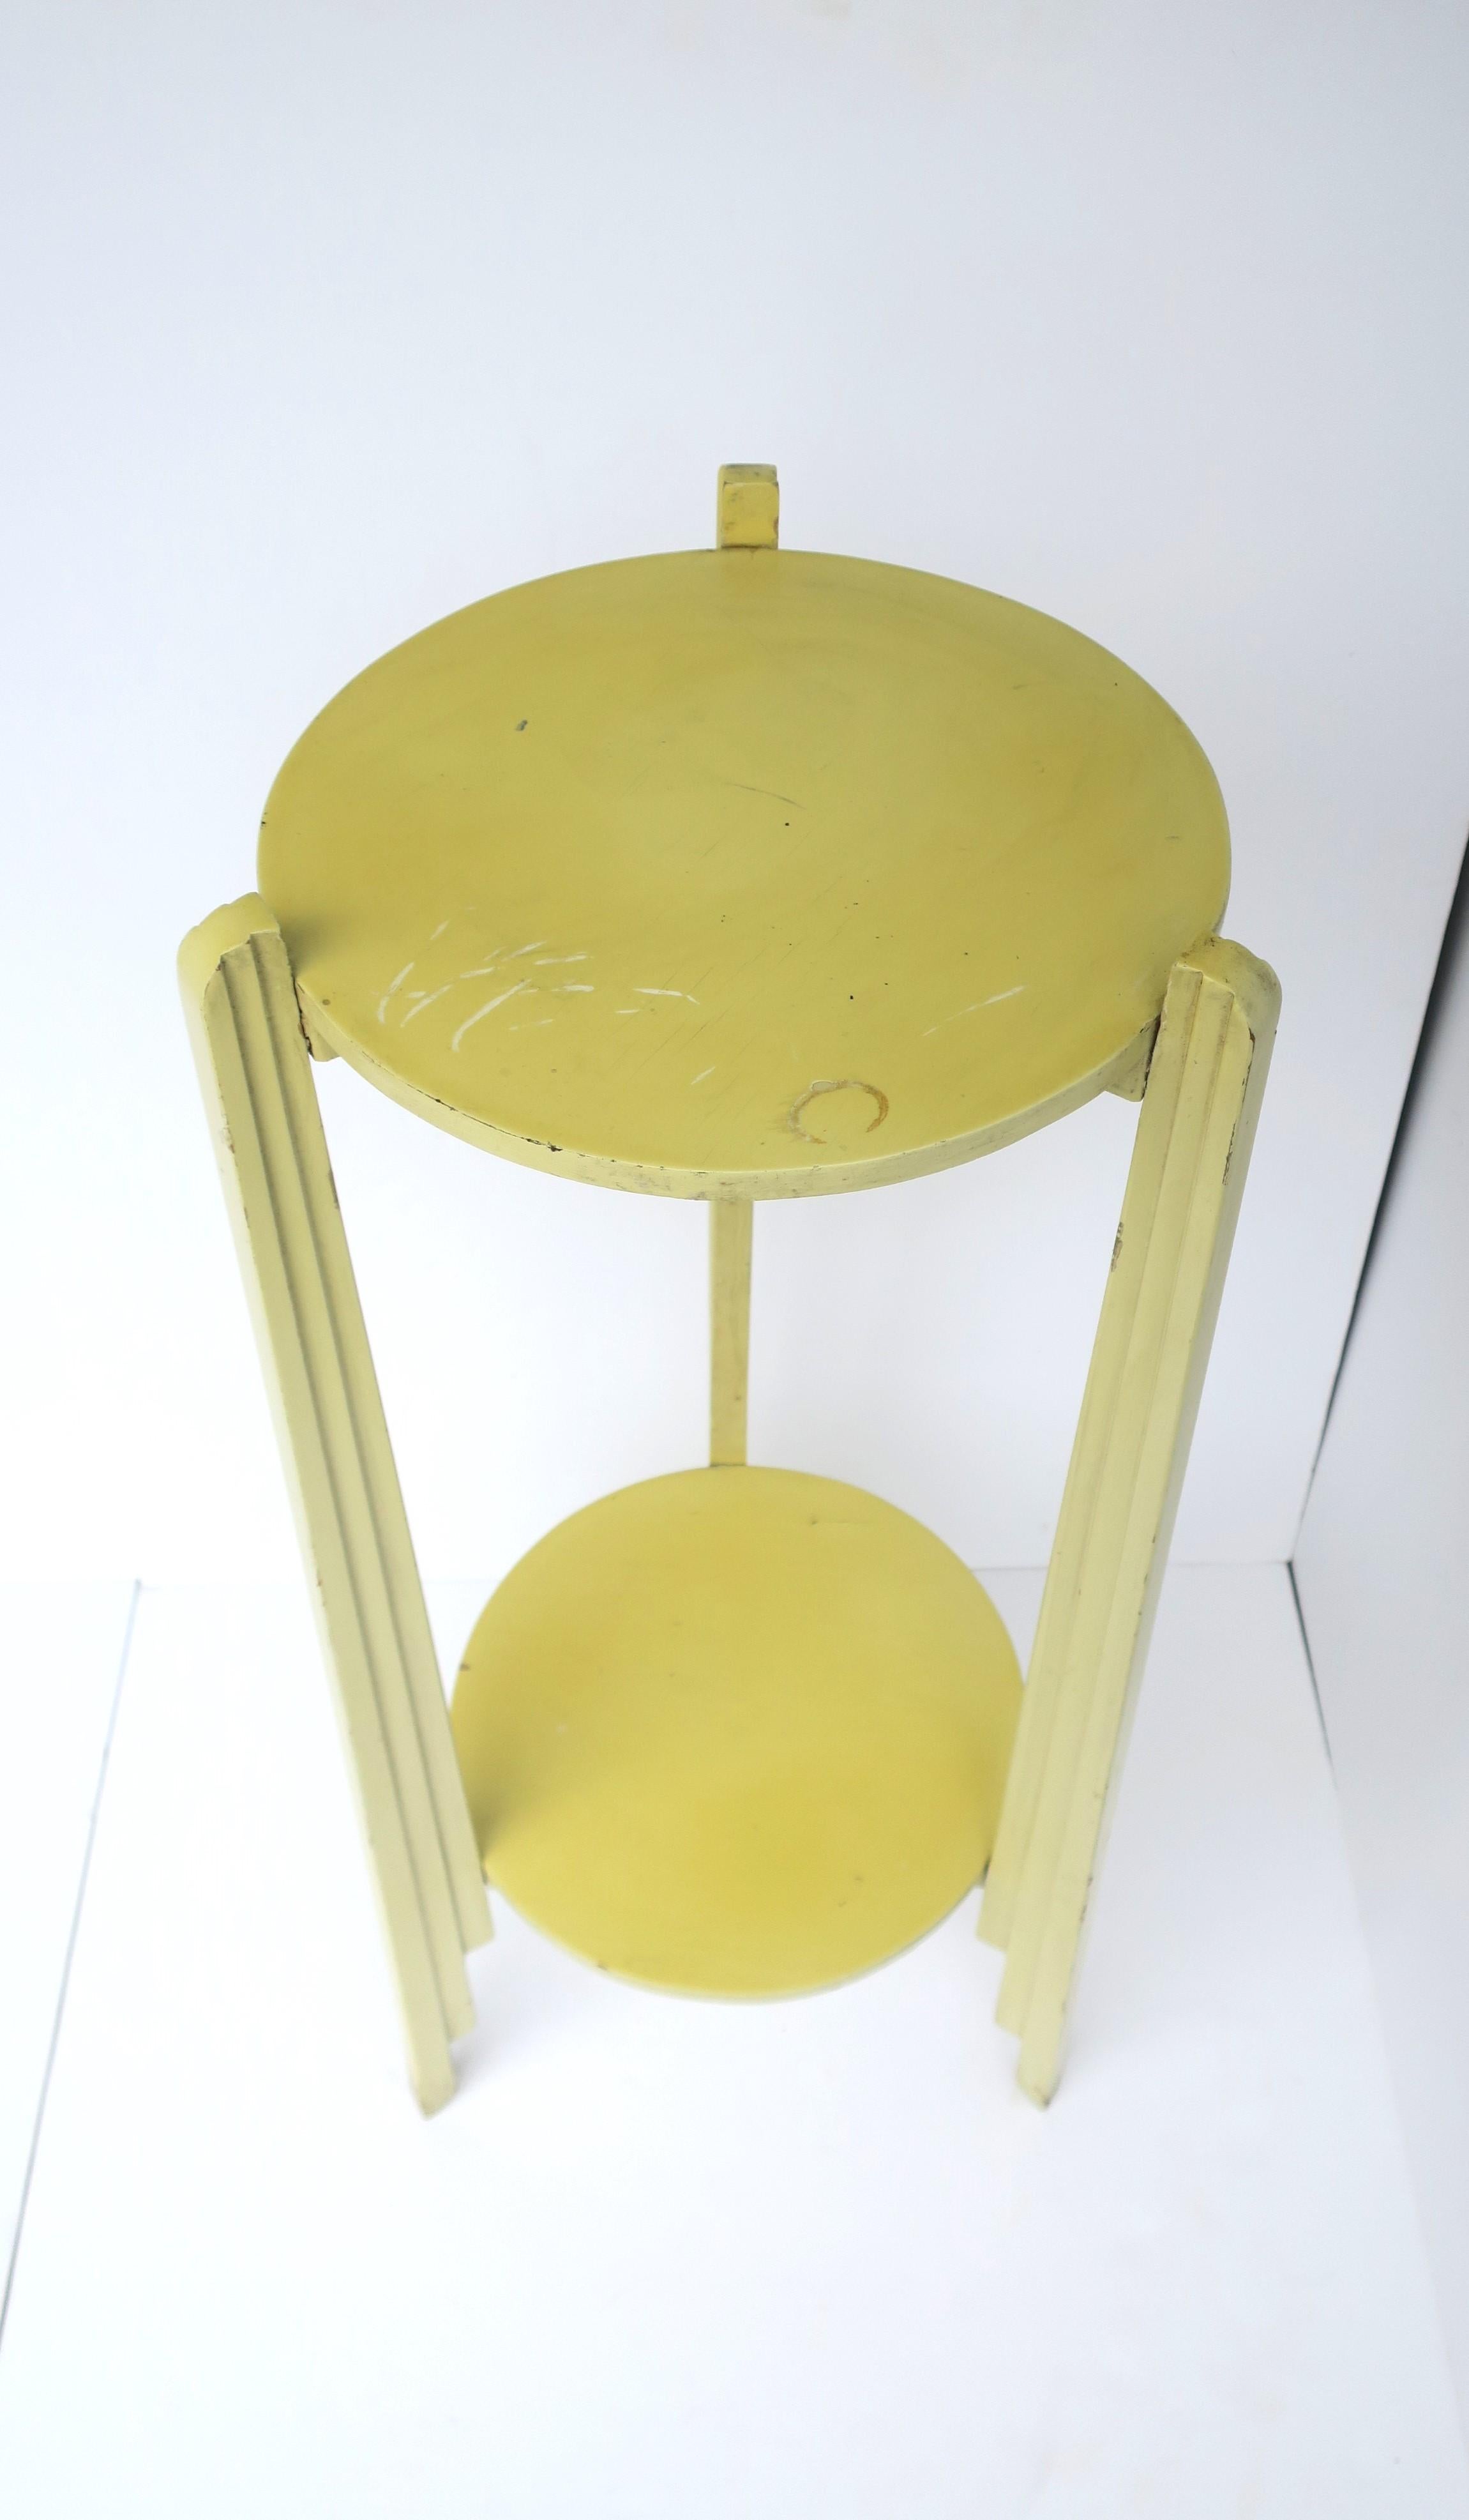 Wood Yellow Art Deco Column Pillar Pedestal Stand with Lower Shelf, 1 of 2 Available For Sale